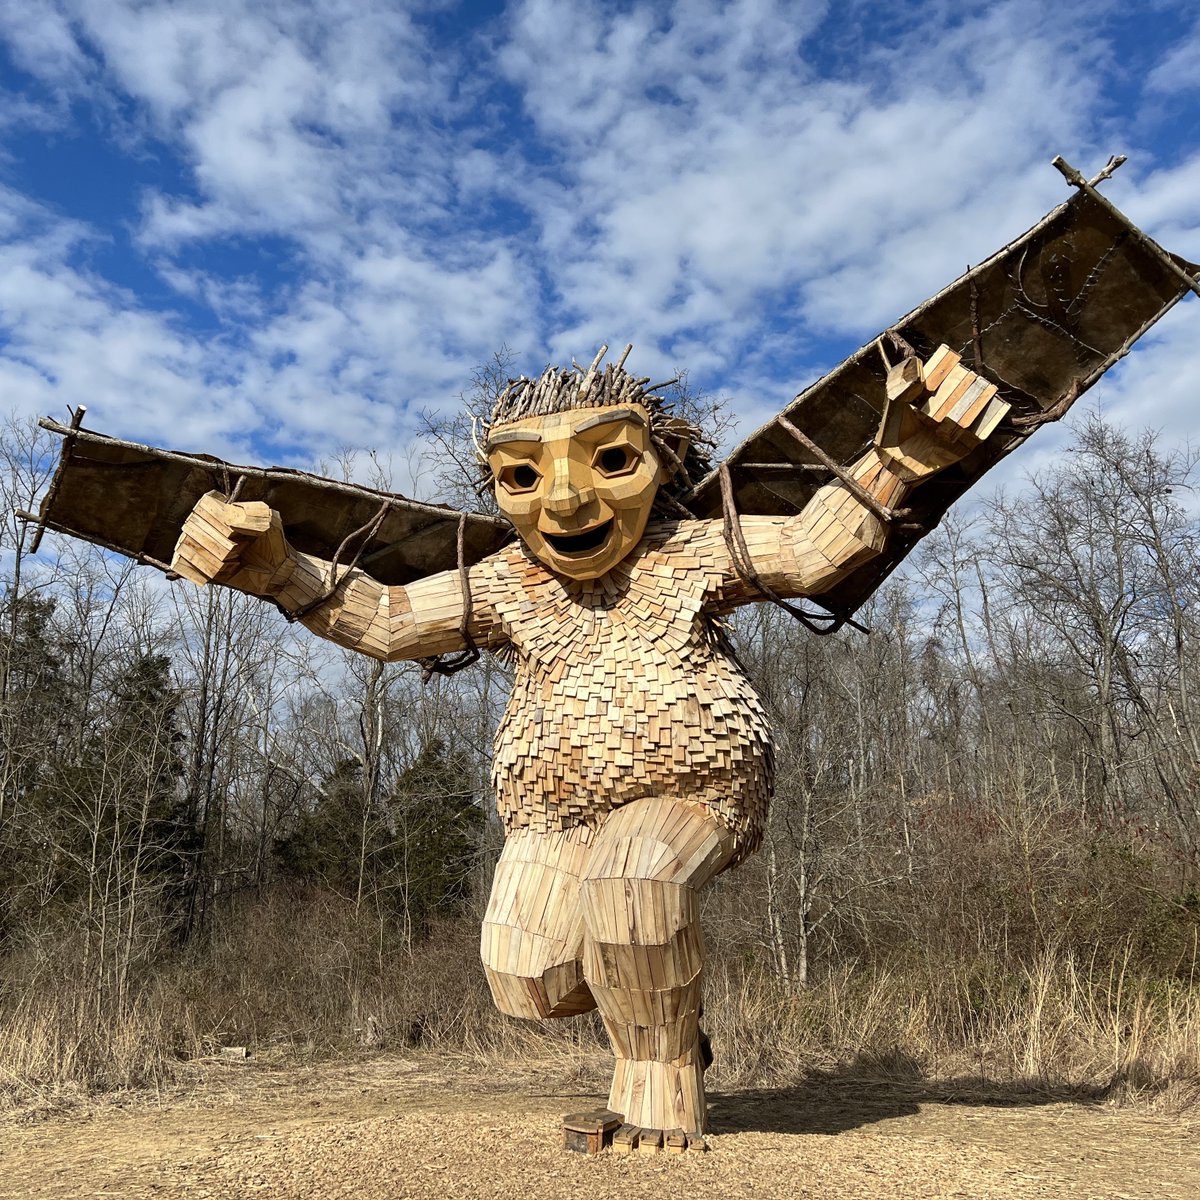 There's unexpected adventure around every corner of Ohio. Like gentle giants that roam southwest Ohio. Read all about them and plan a trip: ohio.org/aullwood-trolls 📍: Bibbi from 'The Troll That Hatched an Egg' at Aullwood Audubon in Dayton 📸: @ohiogirltravels